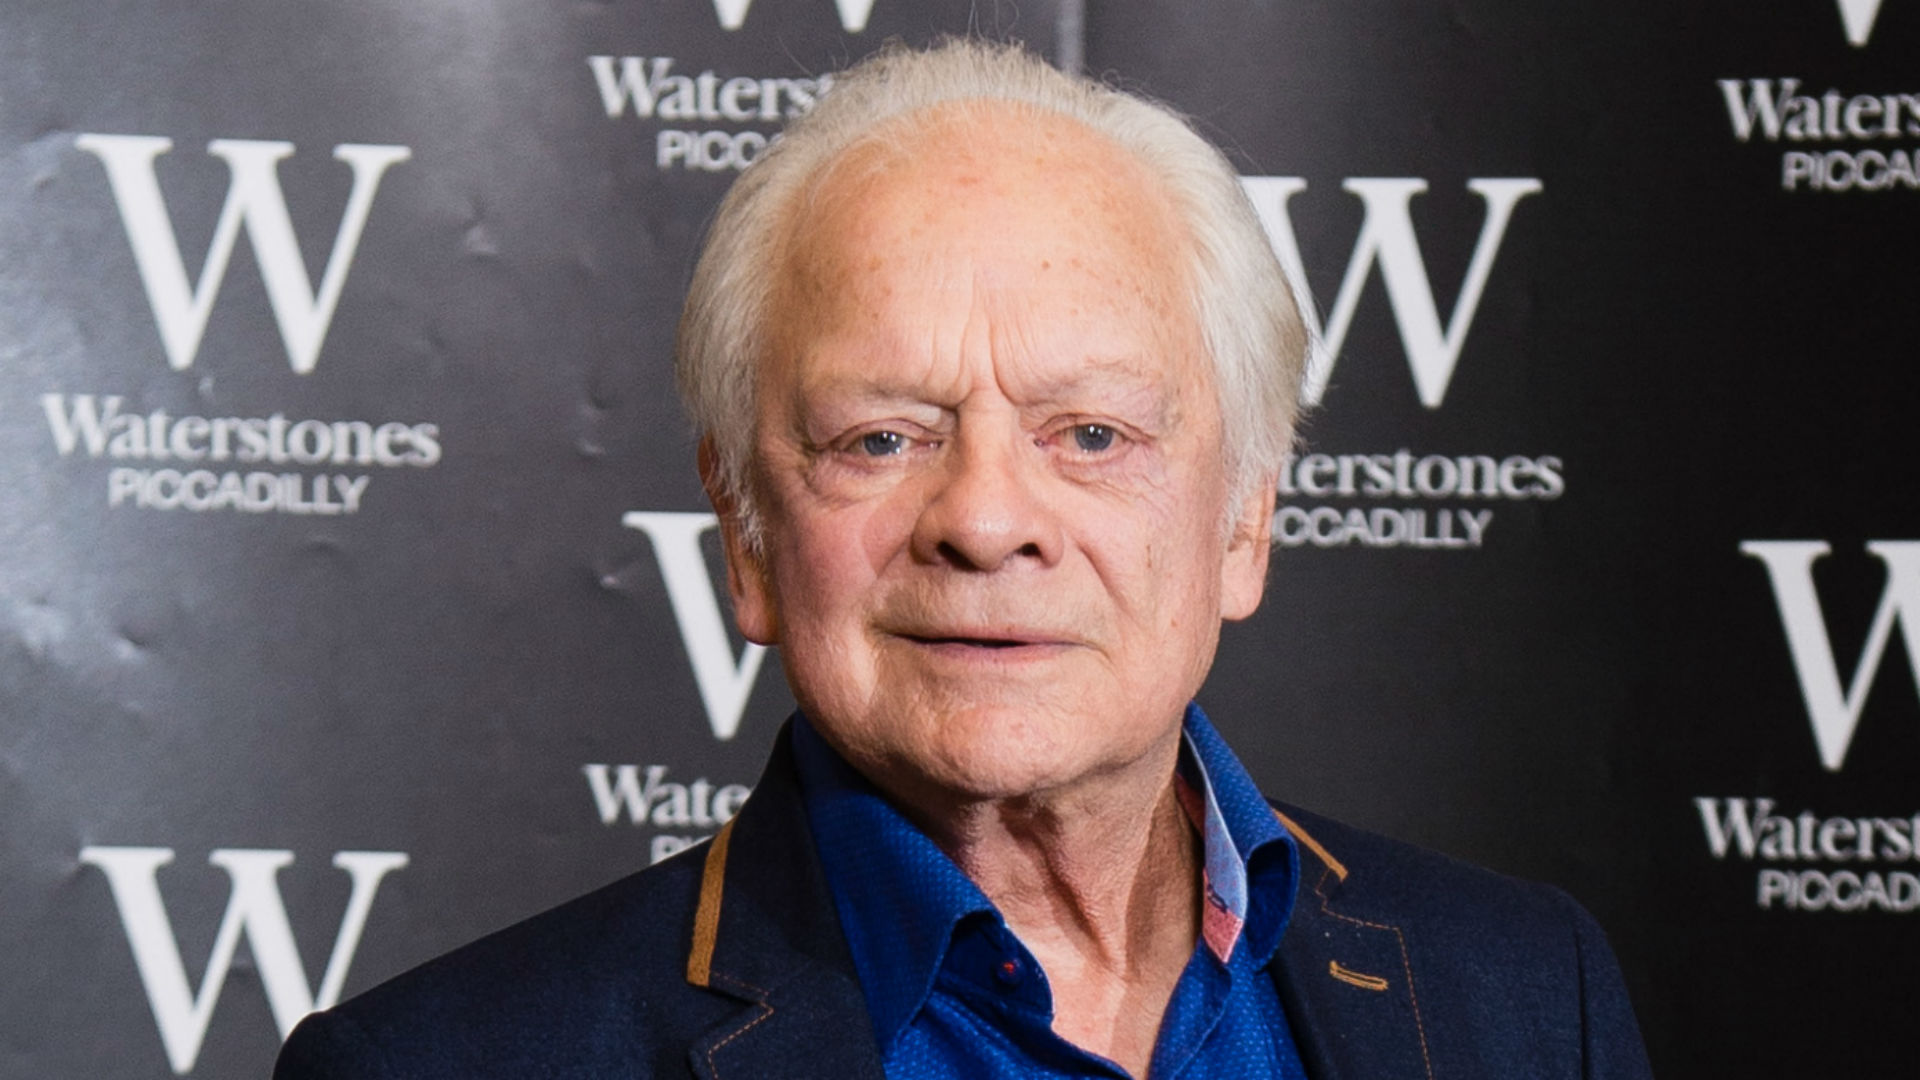 Sir David Jason Rules Out ‘Only Fools and Horses’ Reboot: ‘The Answer is No’